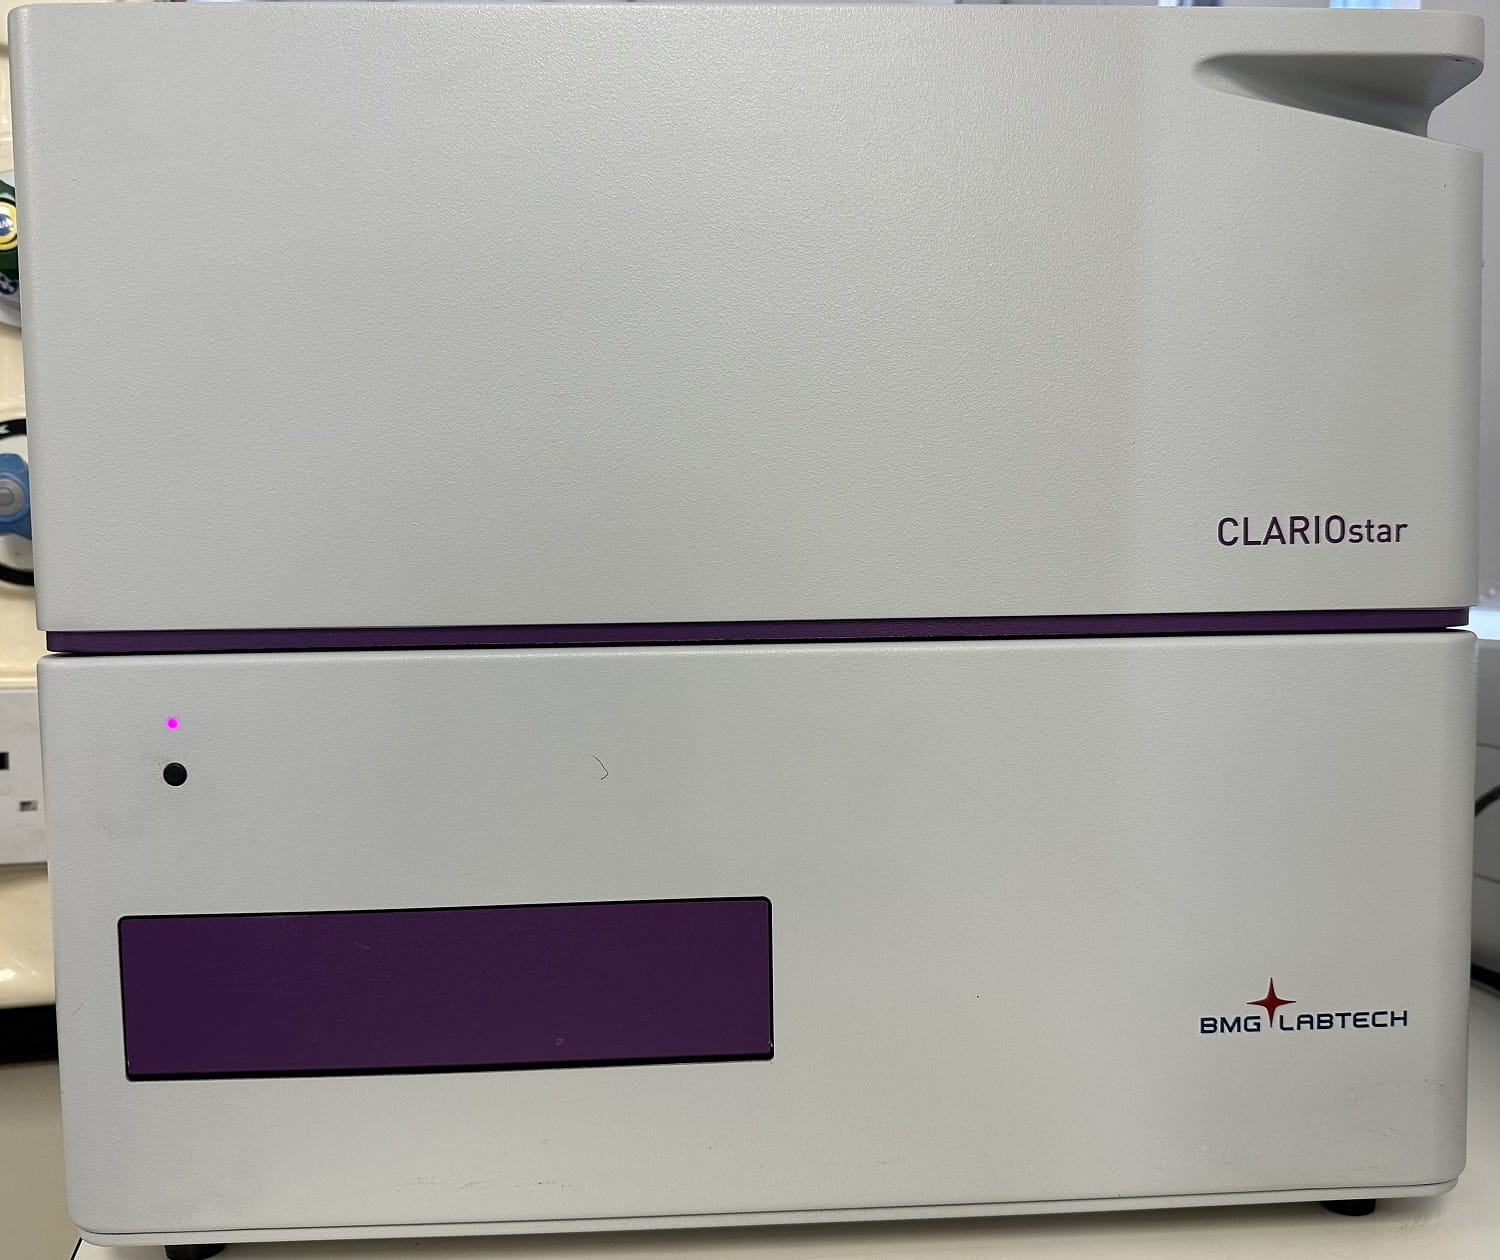 The CLARIOstar plate reader, a large white plastic box with a purple rectangle on the bottom left.